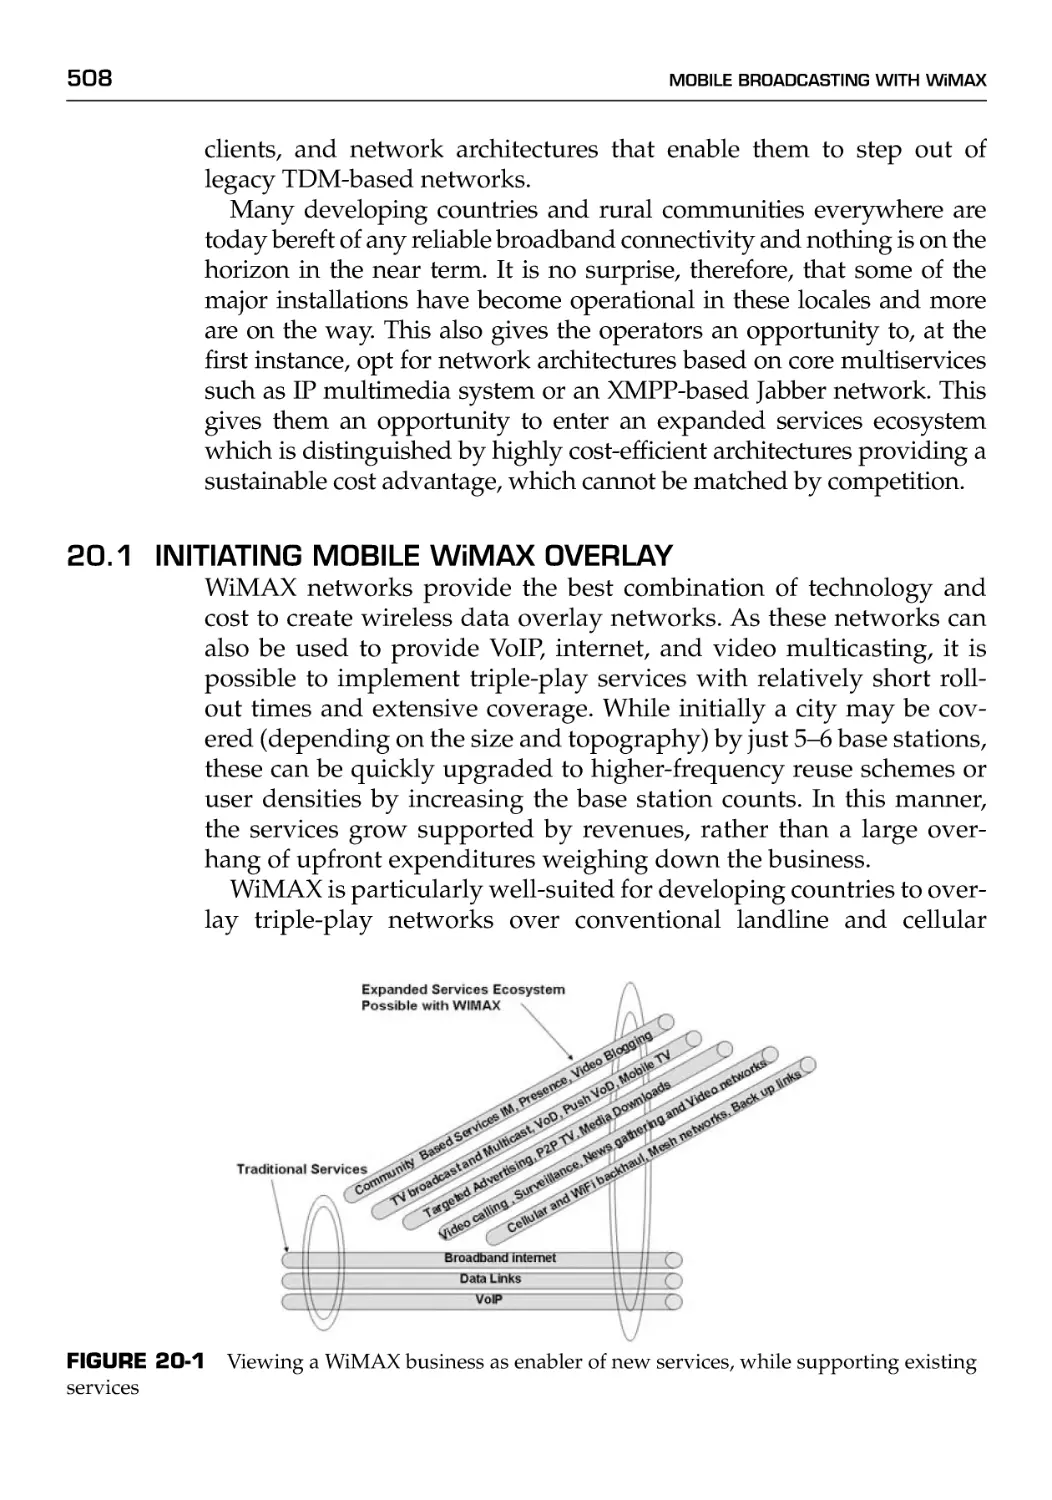 20.1 Initiating Mobile WiMAX Overlay